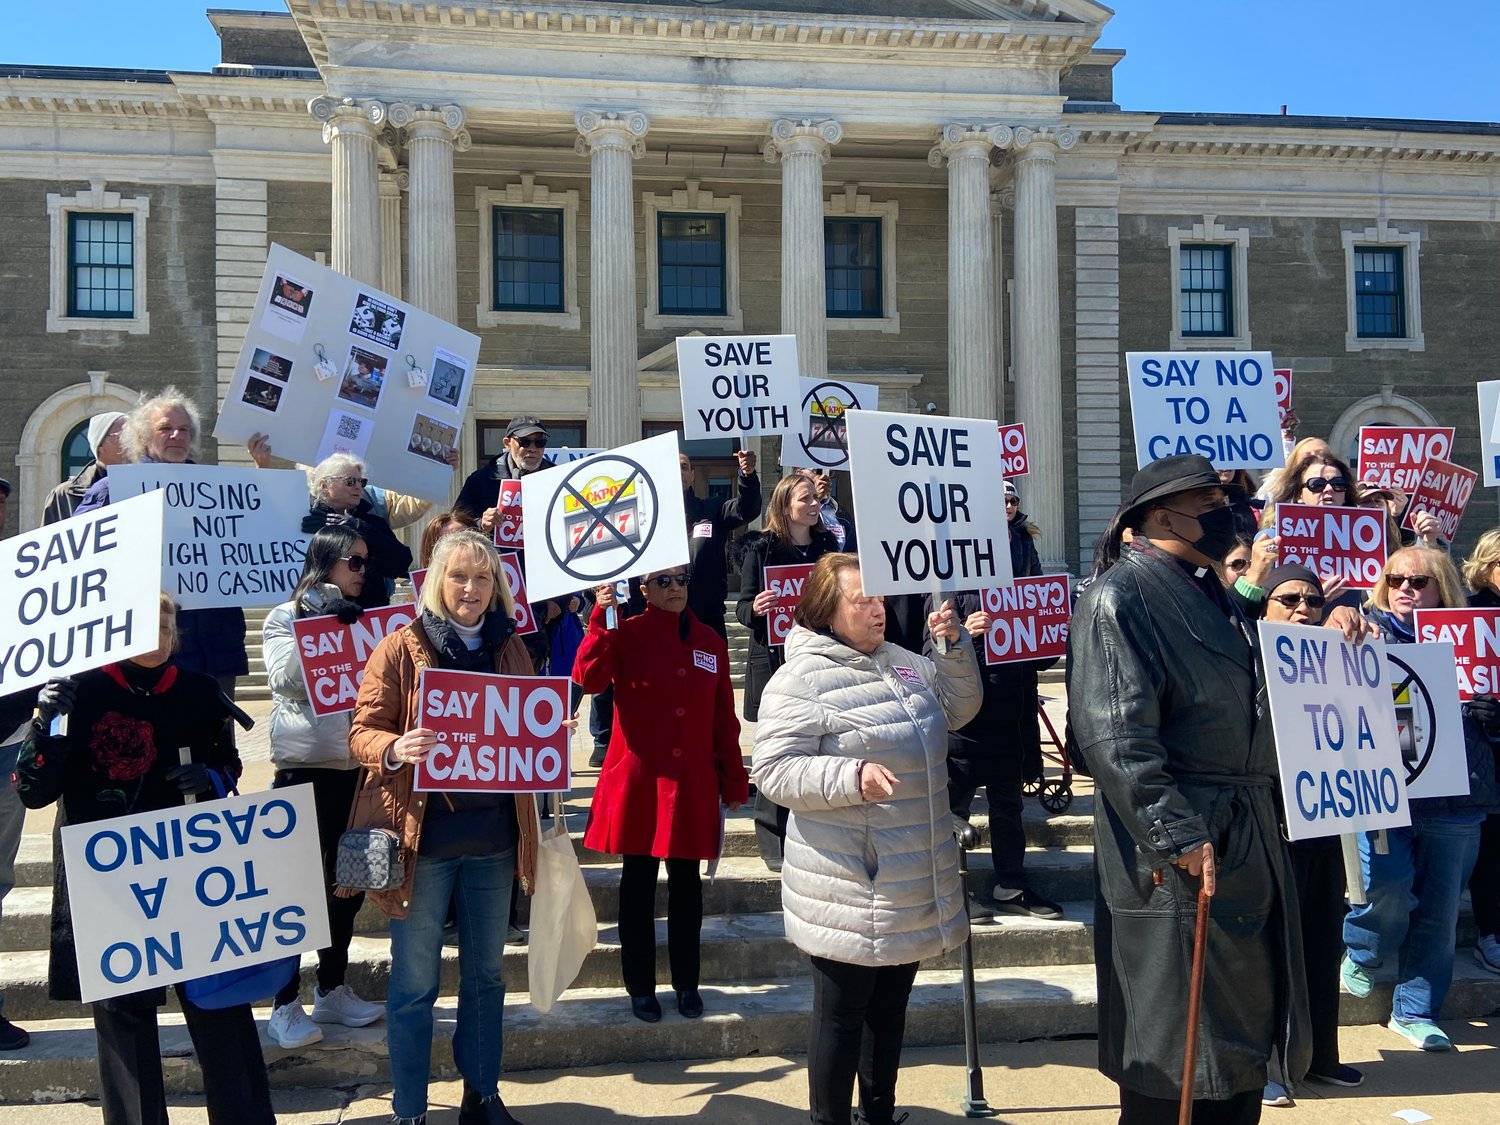 People rallied outside the Nassau County legislative building in Mineola on March 20, calling on County Executive Bruce Blakeman and the Legislature to say no to the proposed Las Vegas Sands casino at the Coliseum.